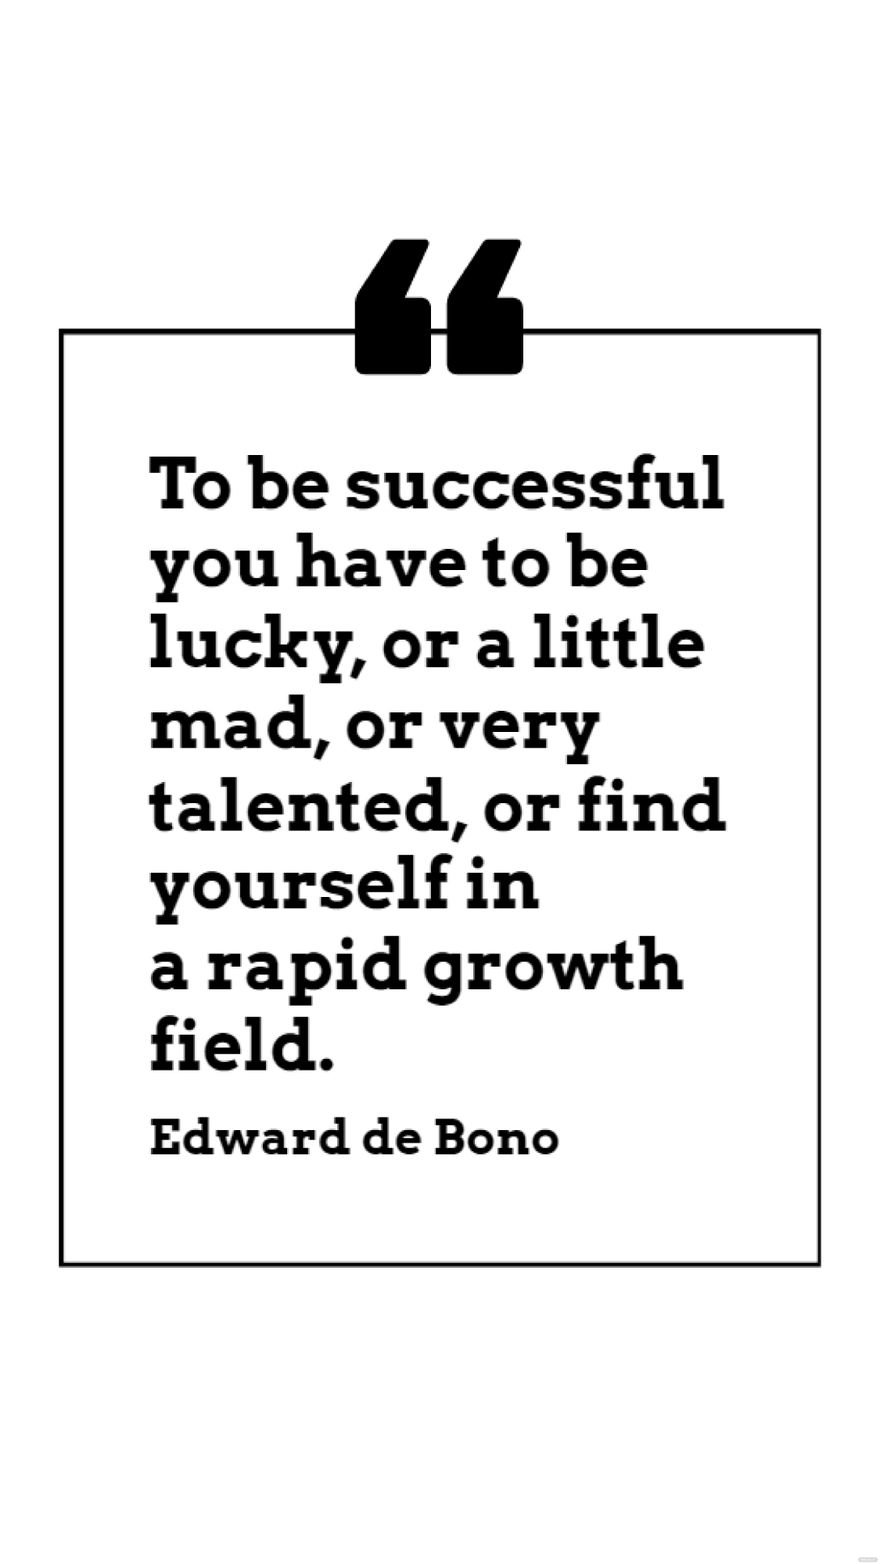 Edward de Bono - To be successful you have to be lucky, or a little mad, or very talented, or find yourself in a rapid growth field. in JPG